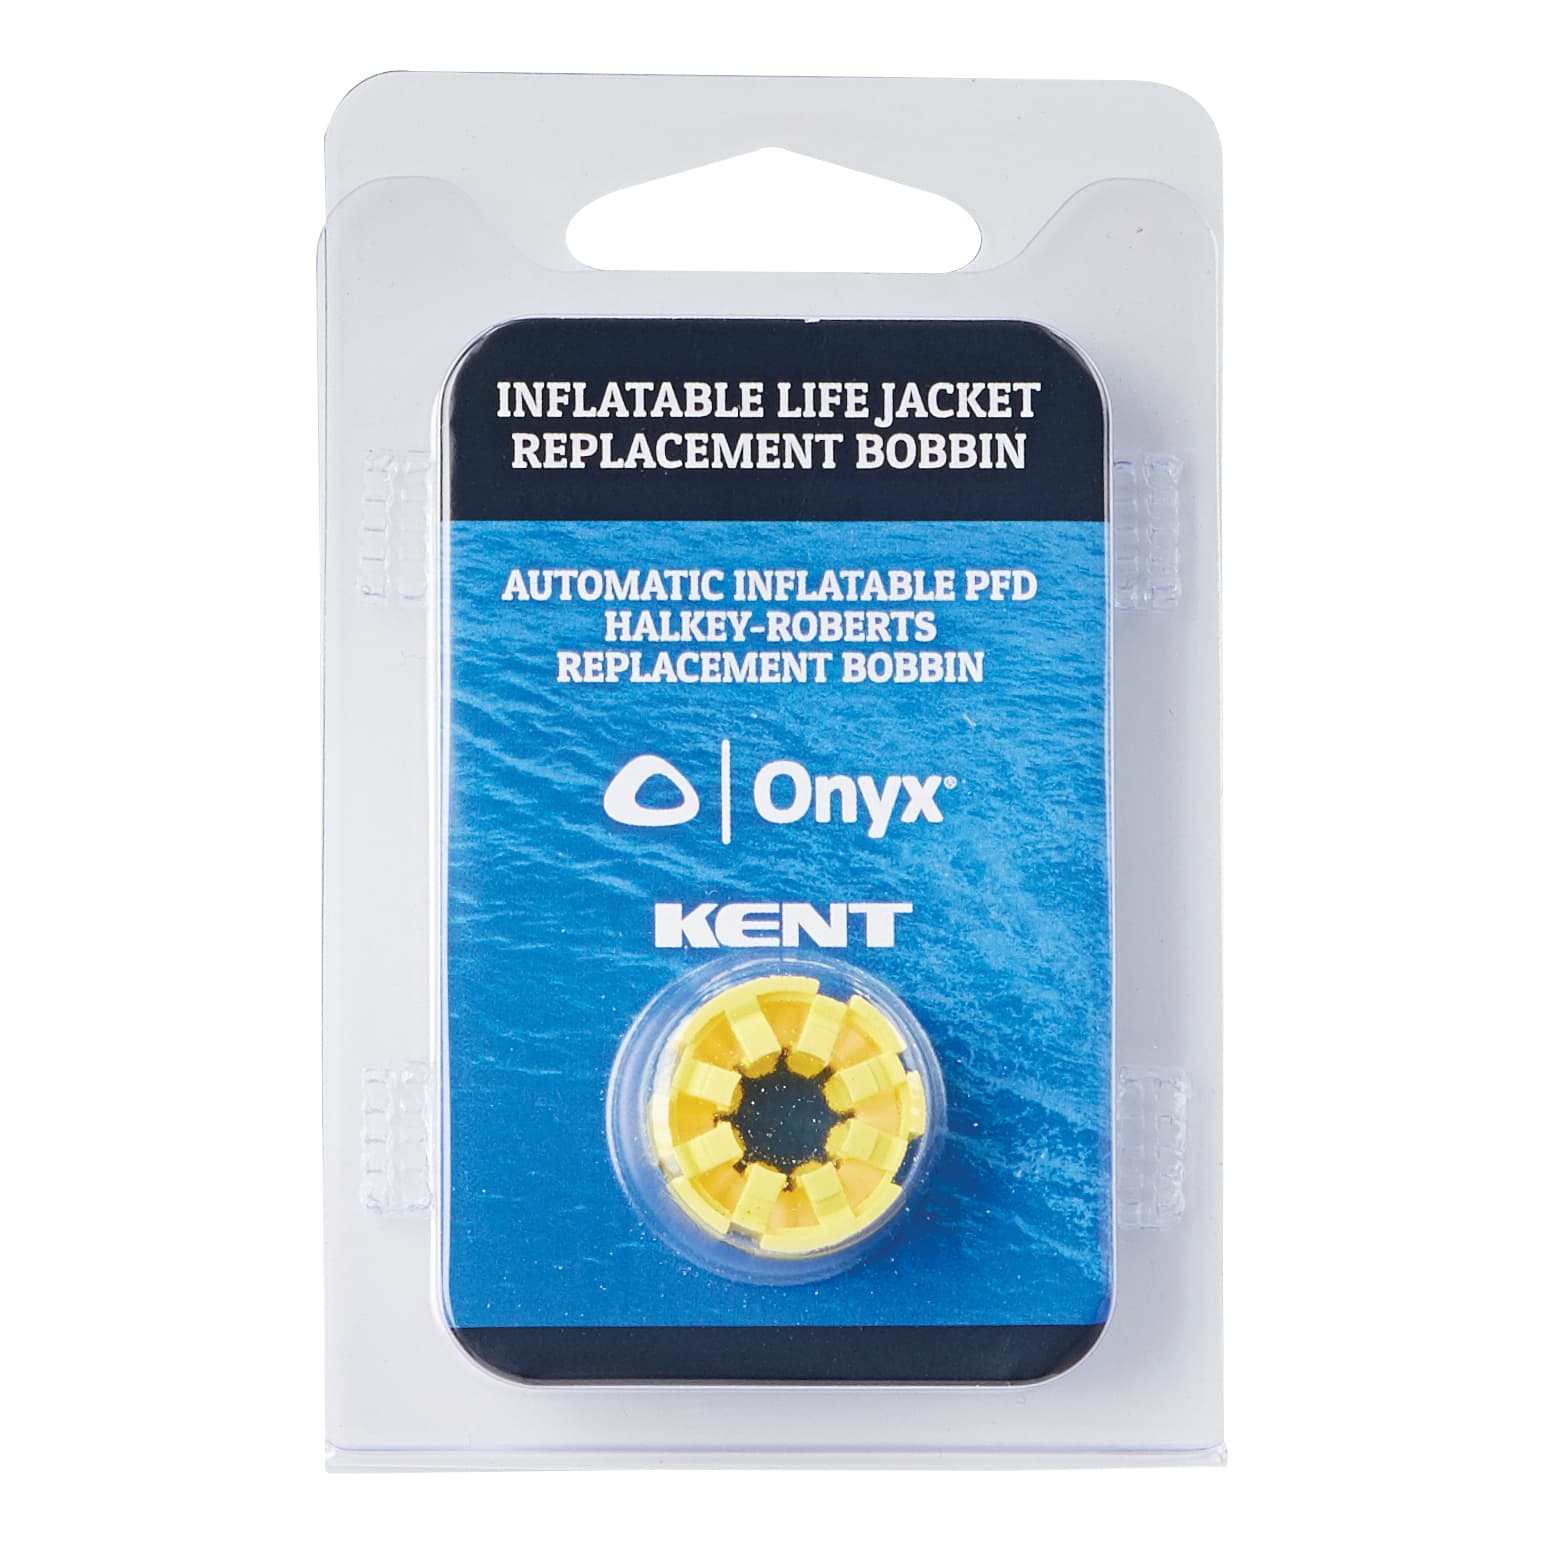 Onyx Inflatable Life Jacket Replacement Bobbin